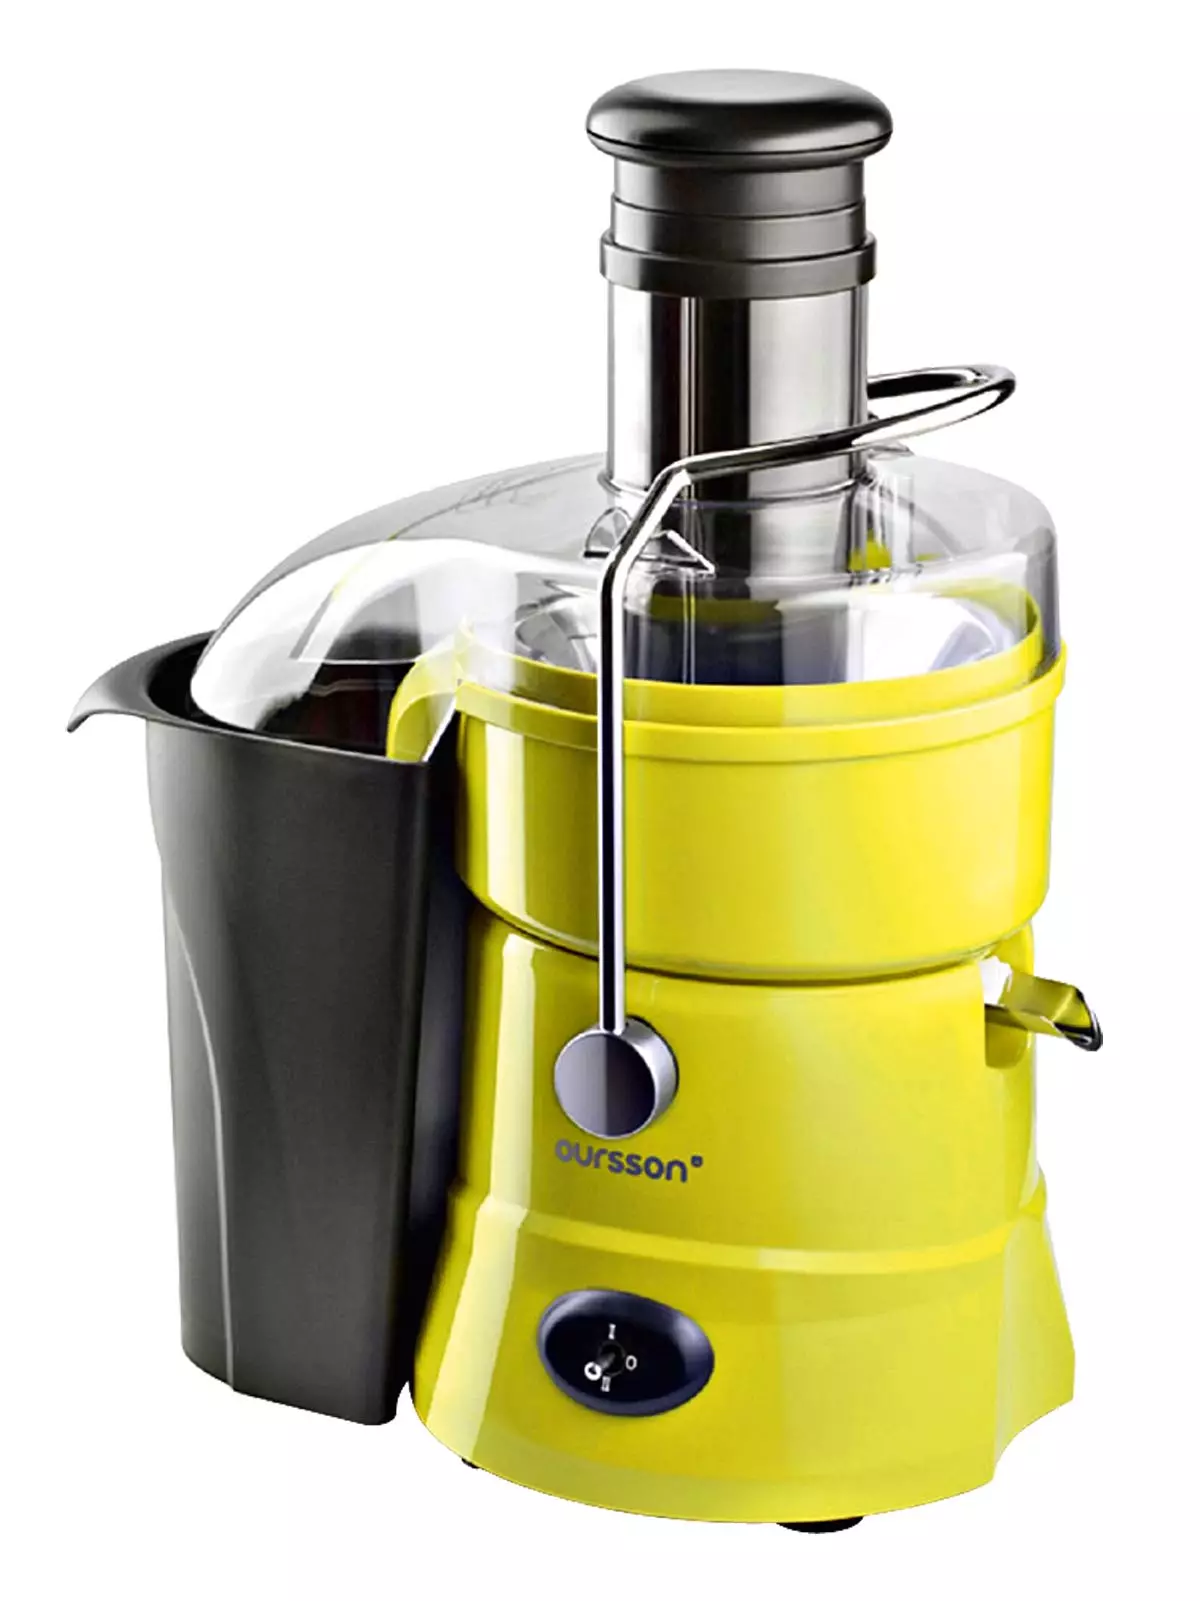 All about centrifugal juicers: from theory to practice